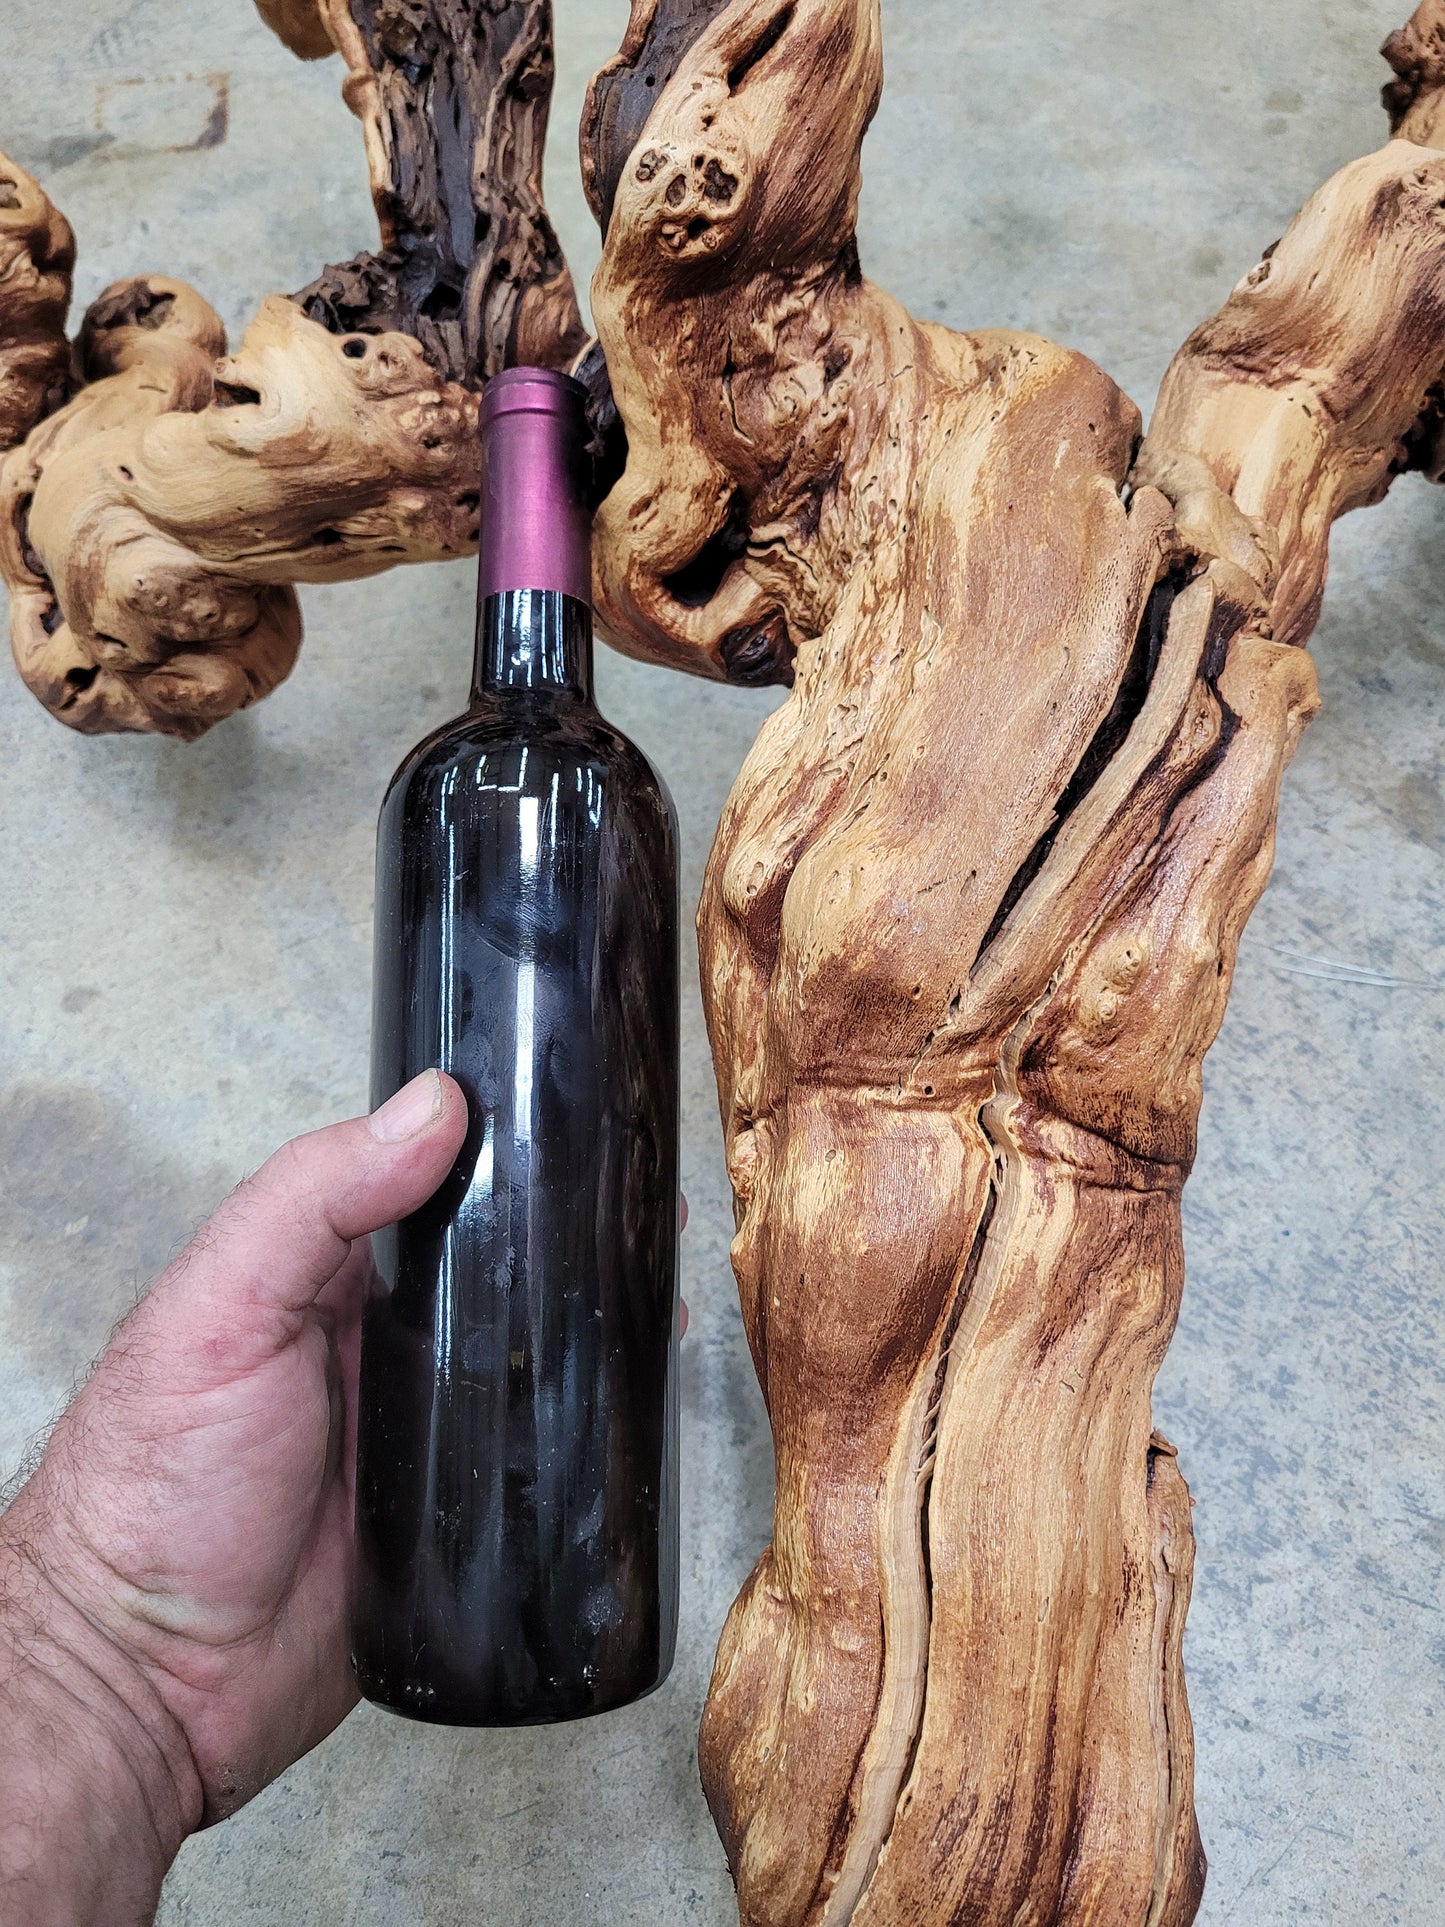 Grape Vine Zinfandel Art From Turley Winery 100% Reclaimed + Ready to Ship!! 110521-7